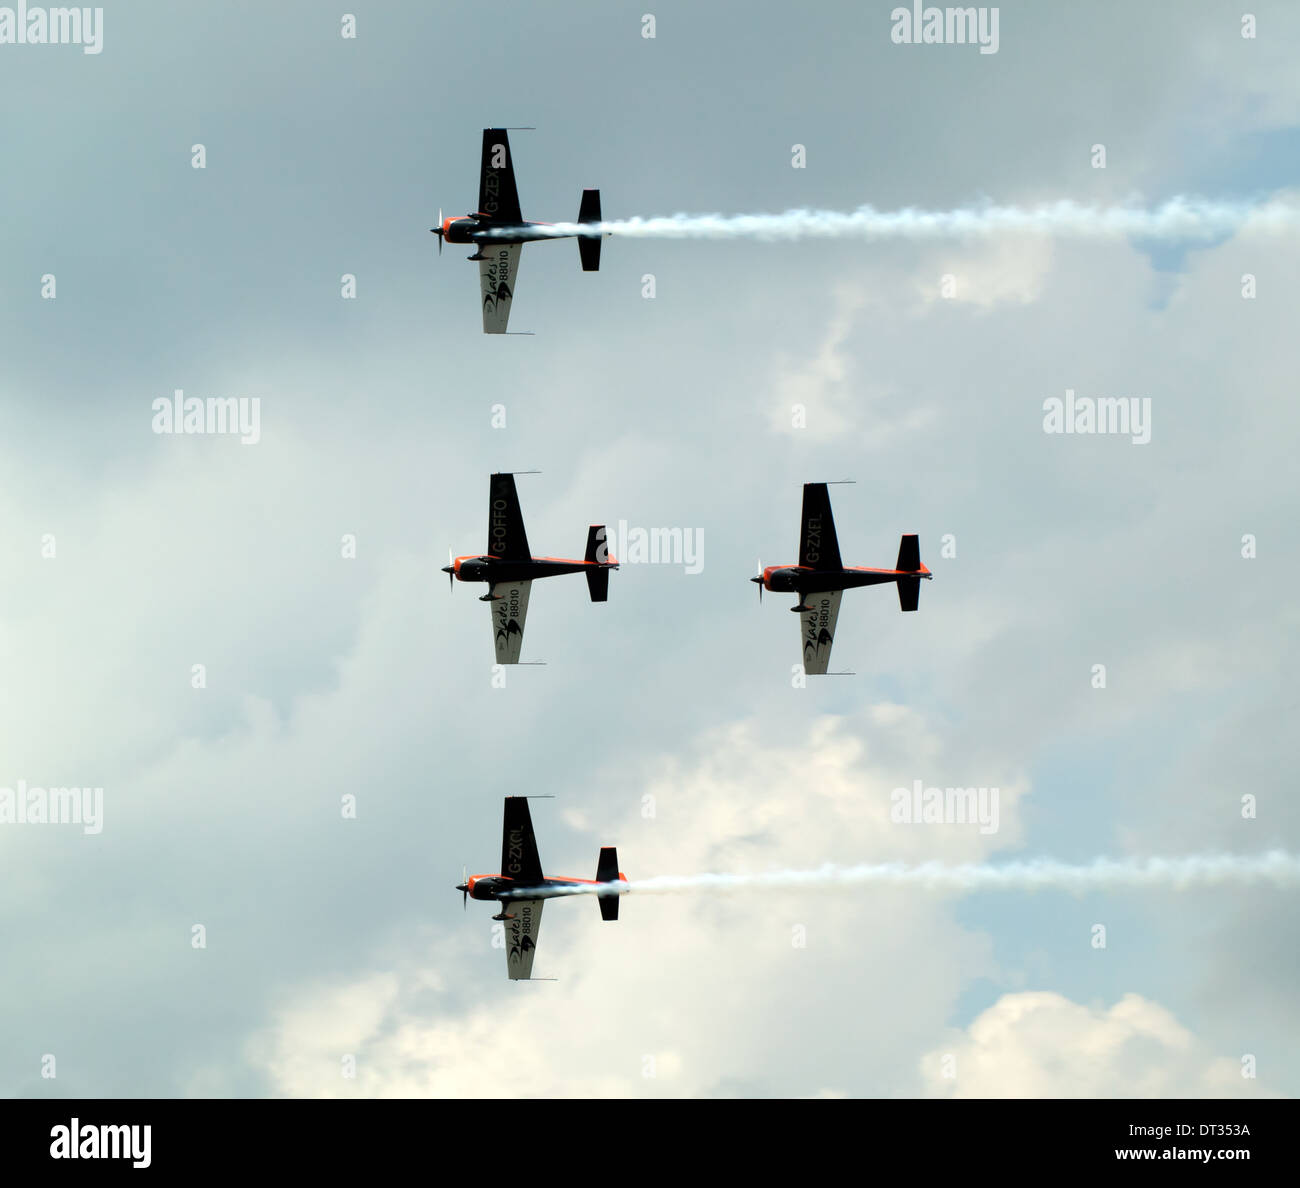 The Blades Aerobatic display team, flying their specially-built Extra 300 LPs', at Biggin Hill Air Show 2007. Stock Photo